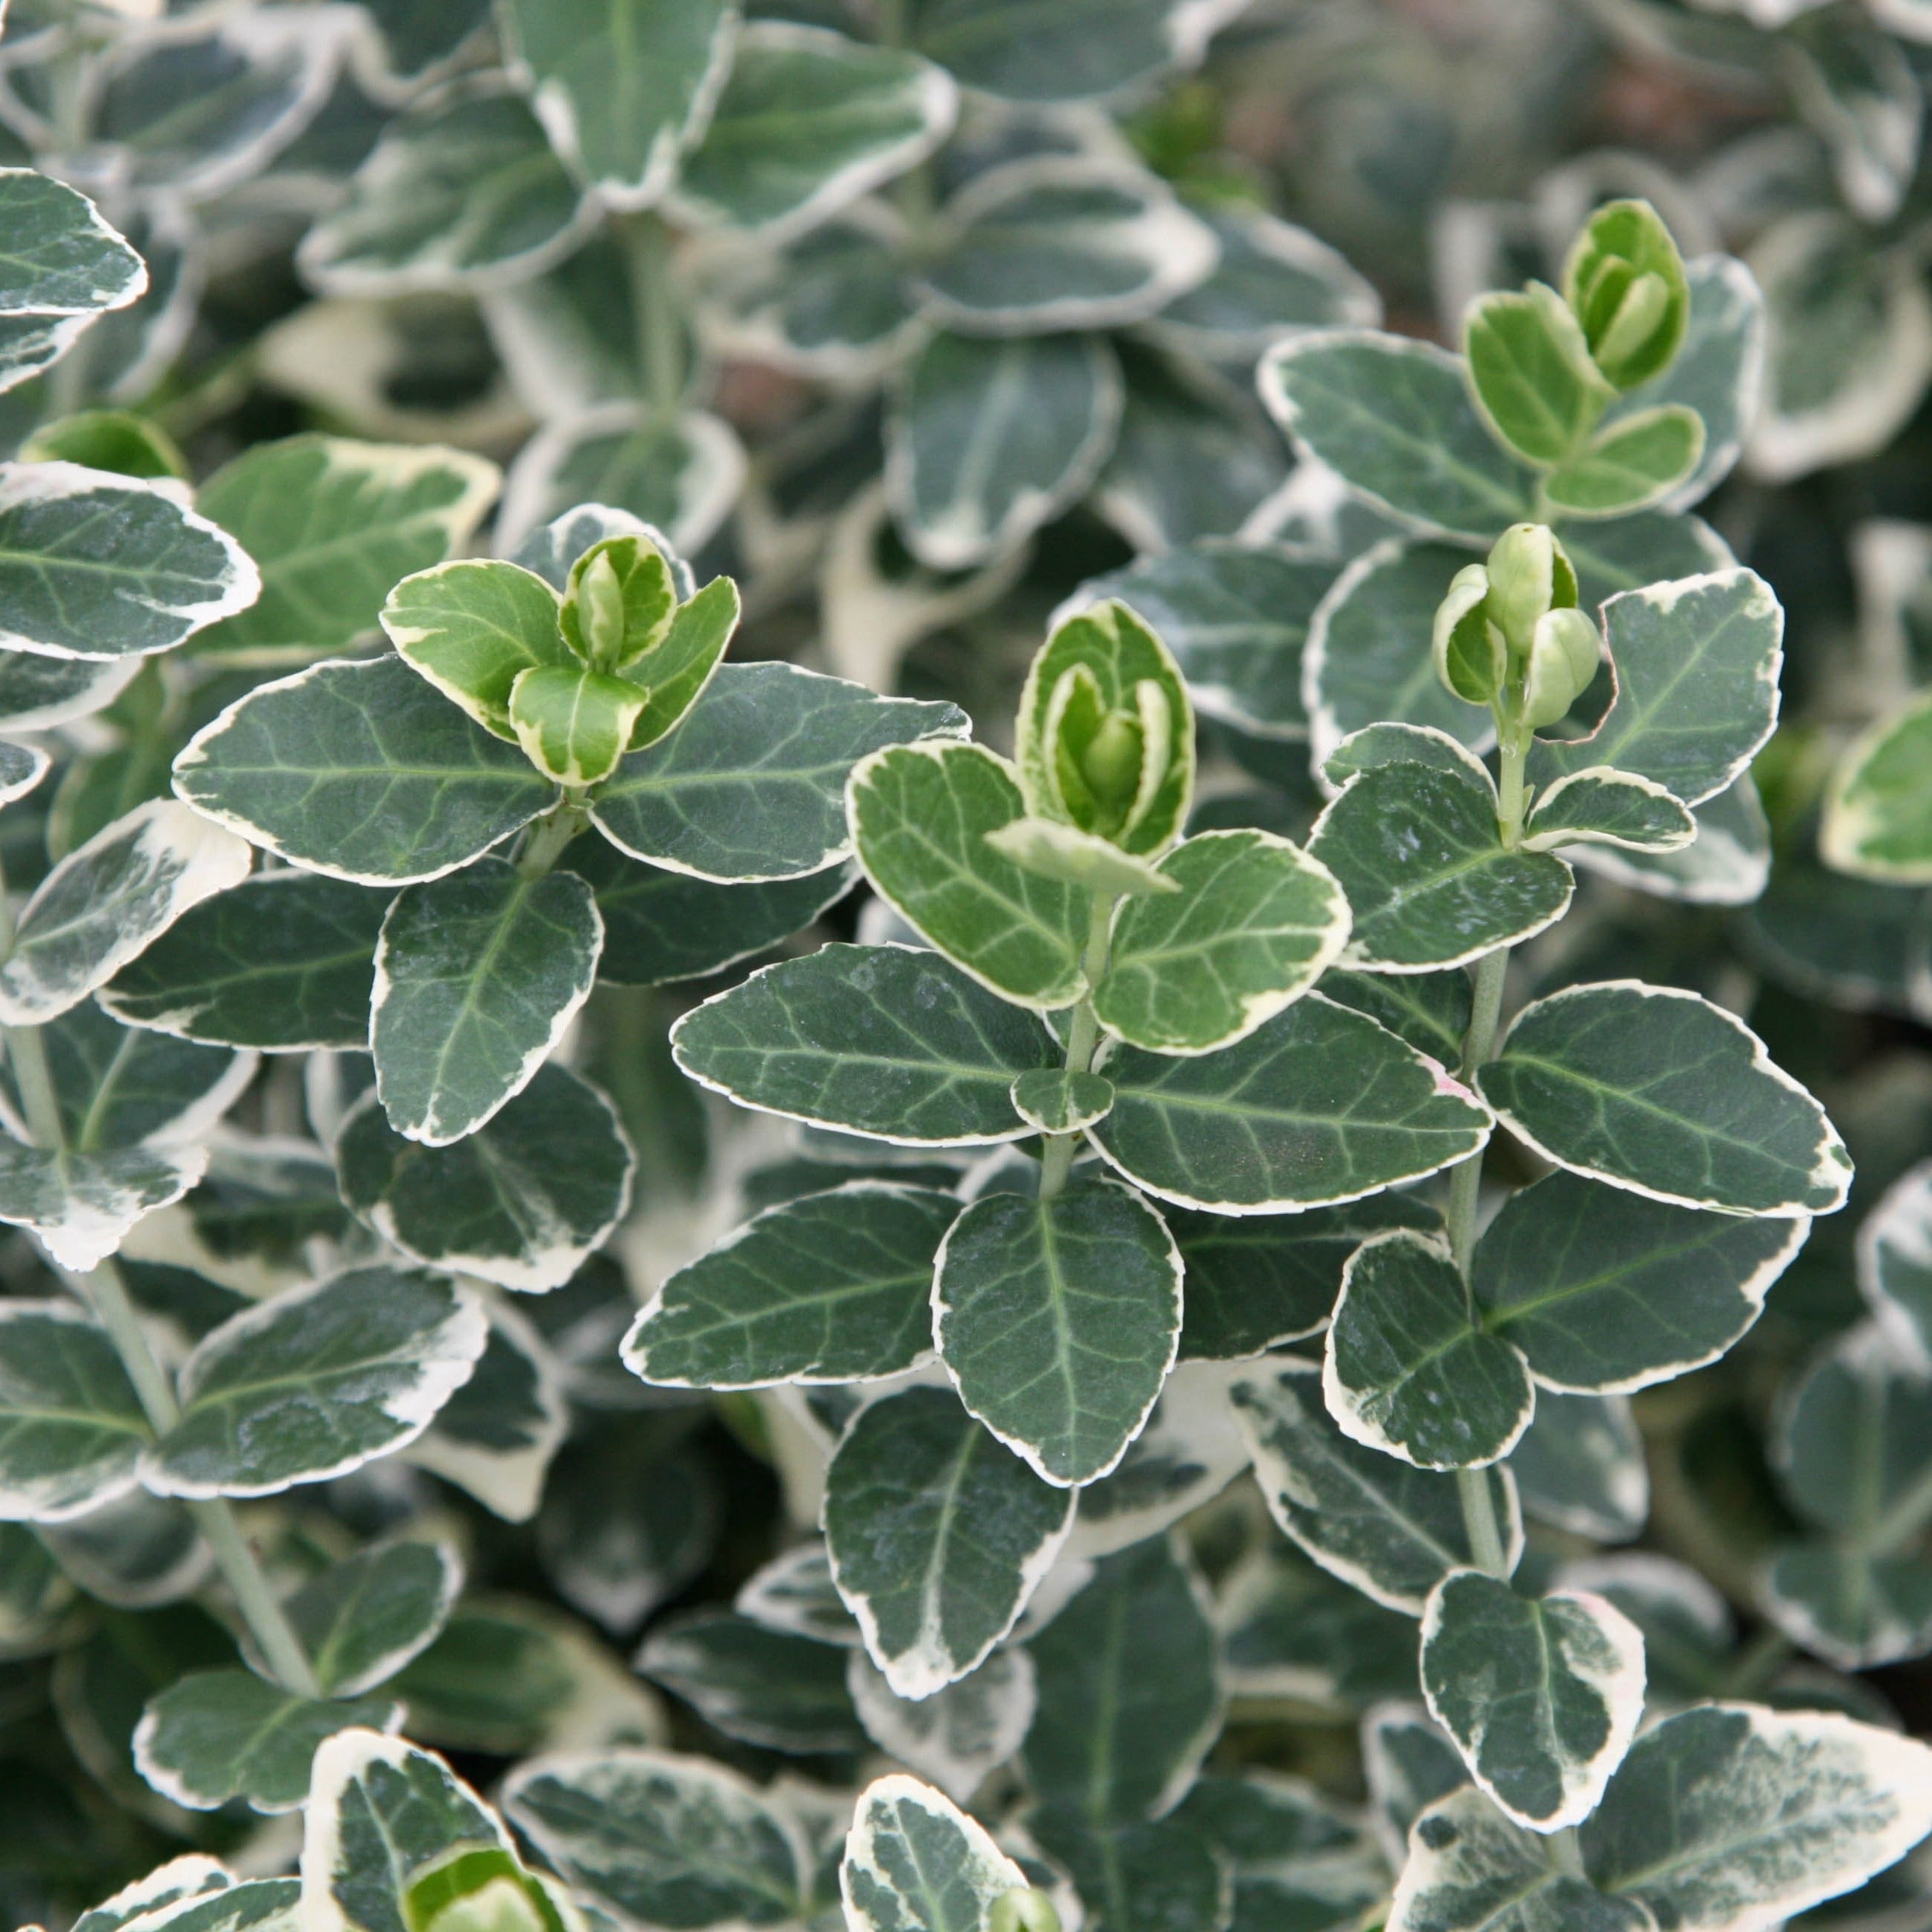 Image of Euonymus Emerald Gaiety with crocuses